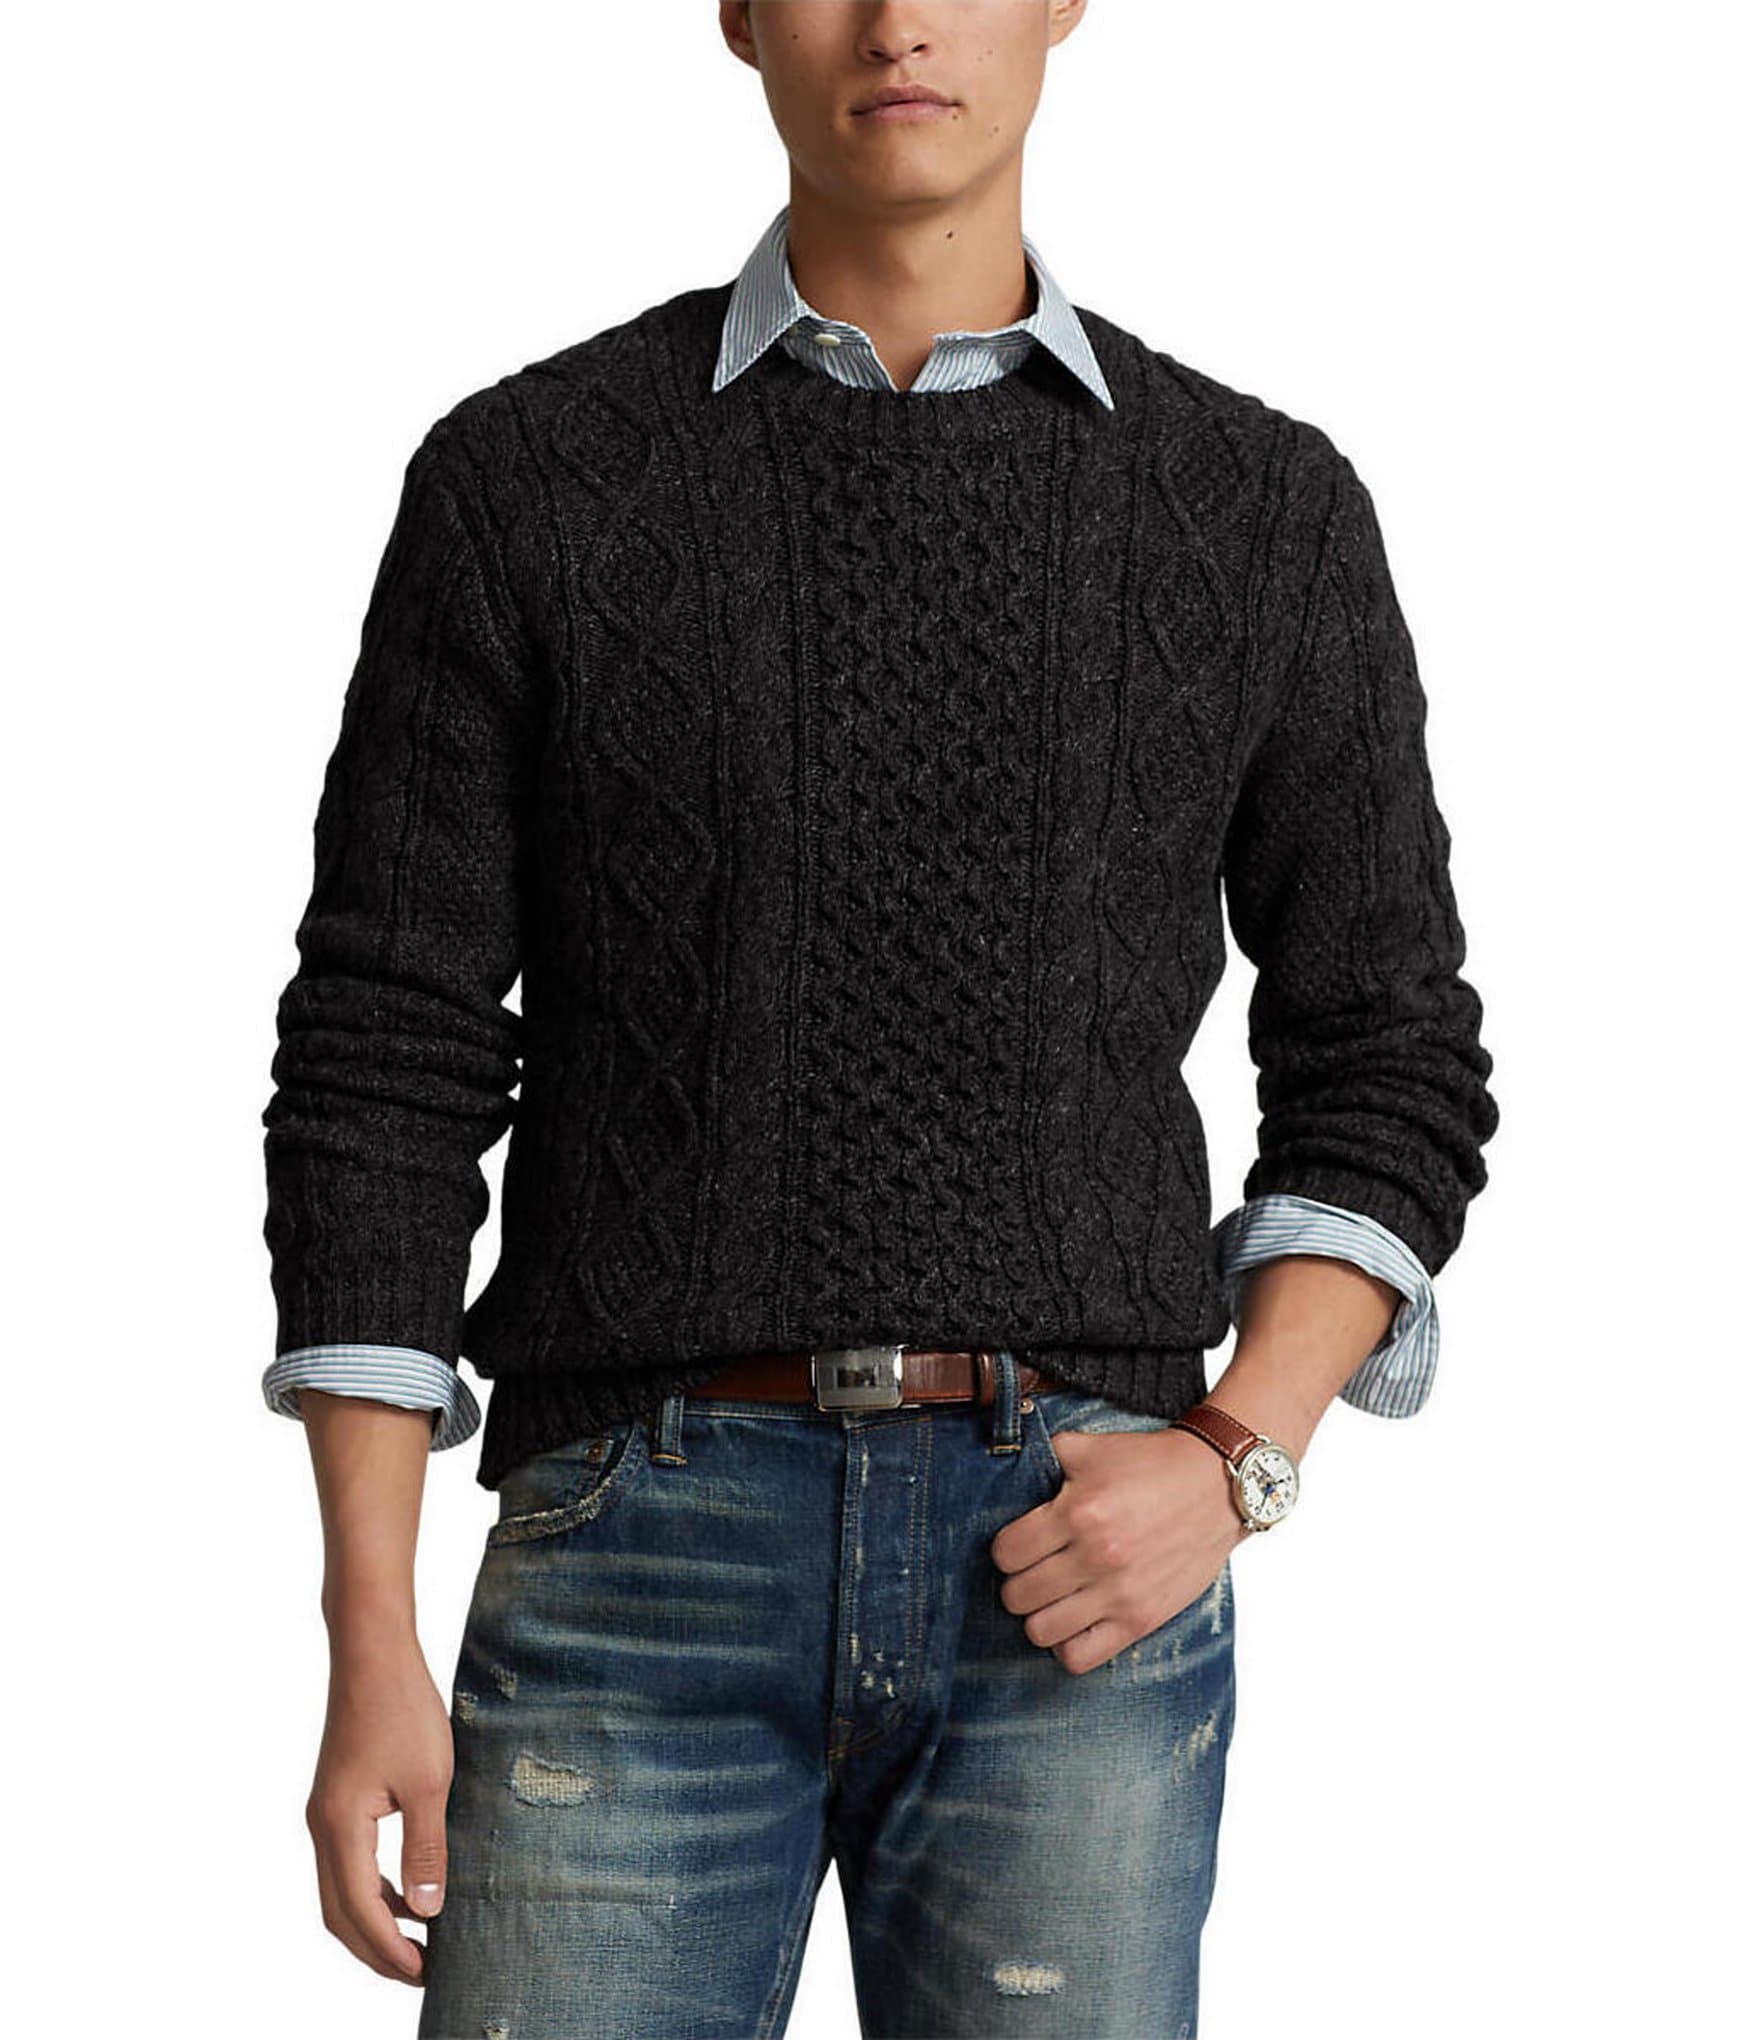 Polo Ralph Lauren Iconic Fisherman's Cable Knit Sweater | Dillard's